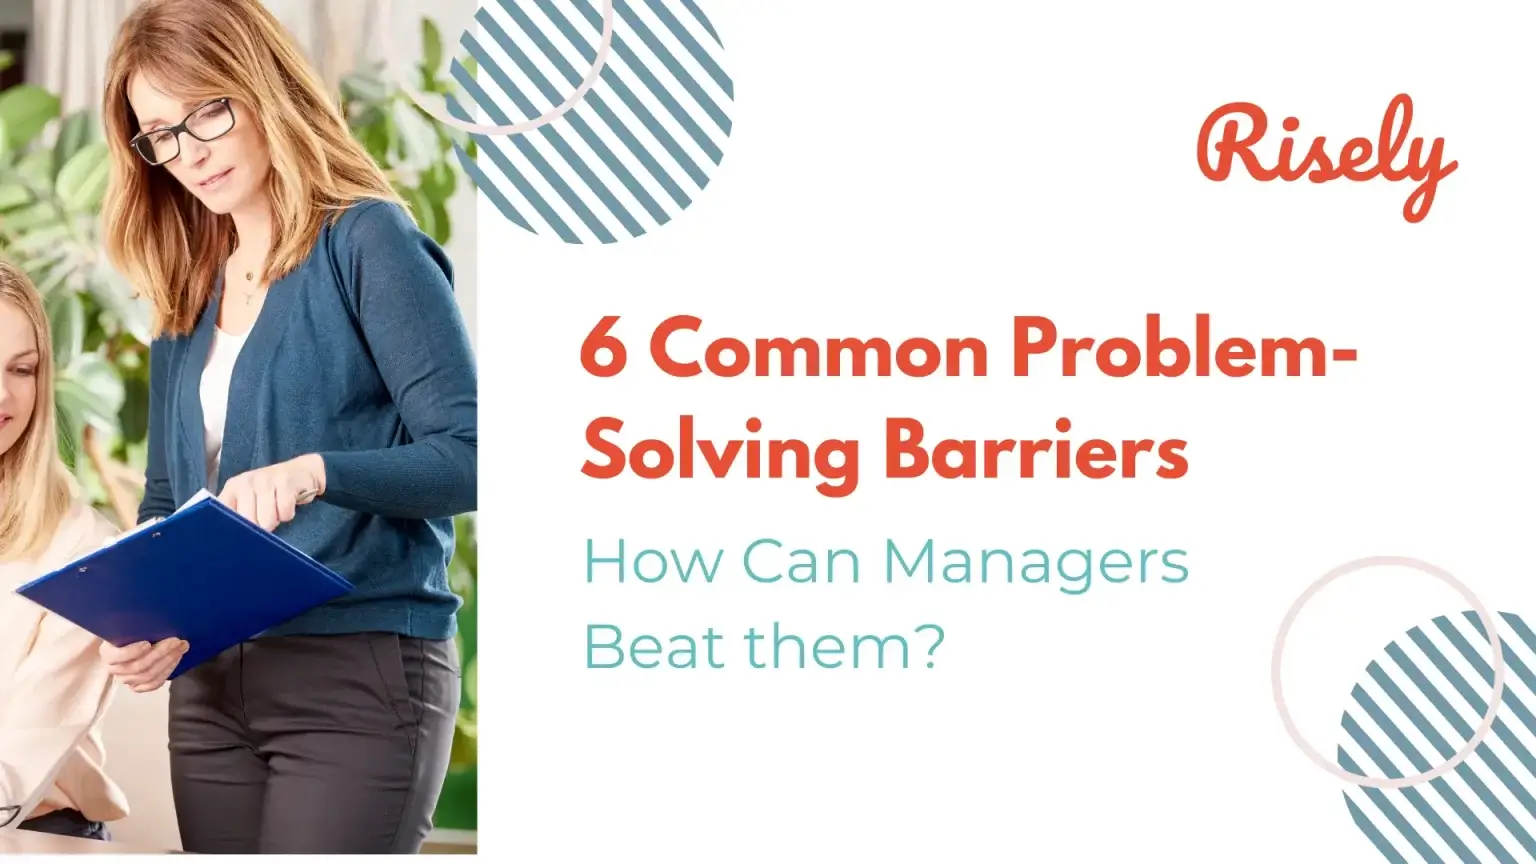 6 Common Problem Solving Barriers and How Can Managers Beat them?